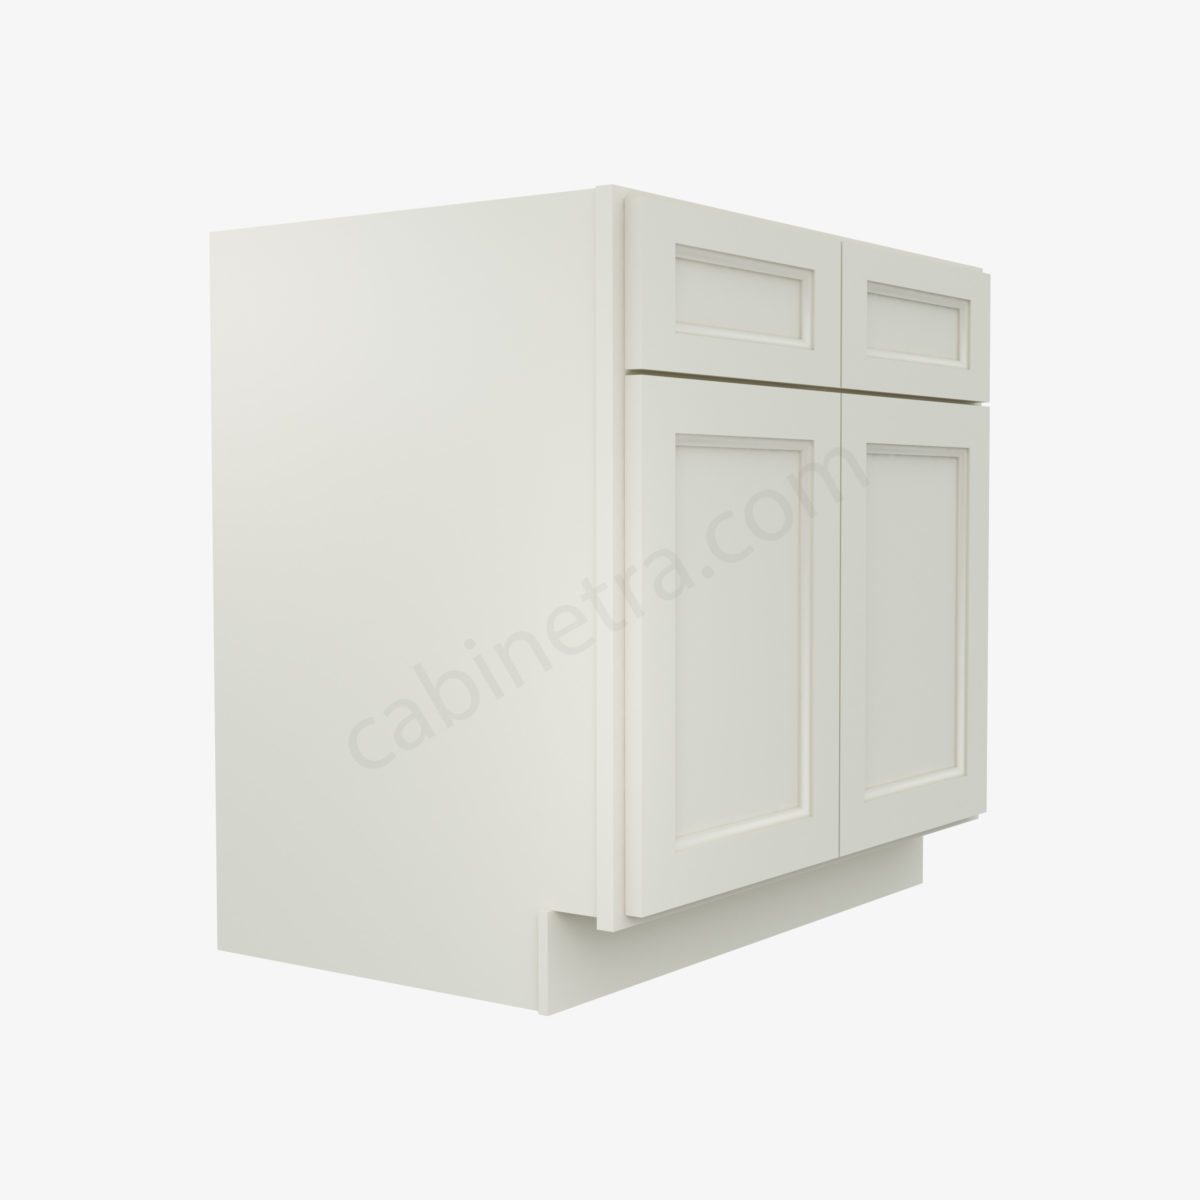 TQ B33B 4 Forevermark Townplace Crema Cabinetra scaled